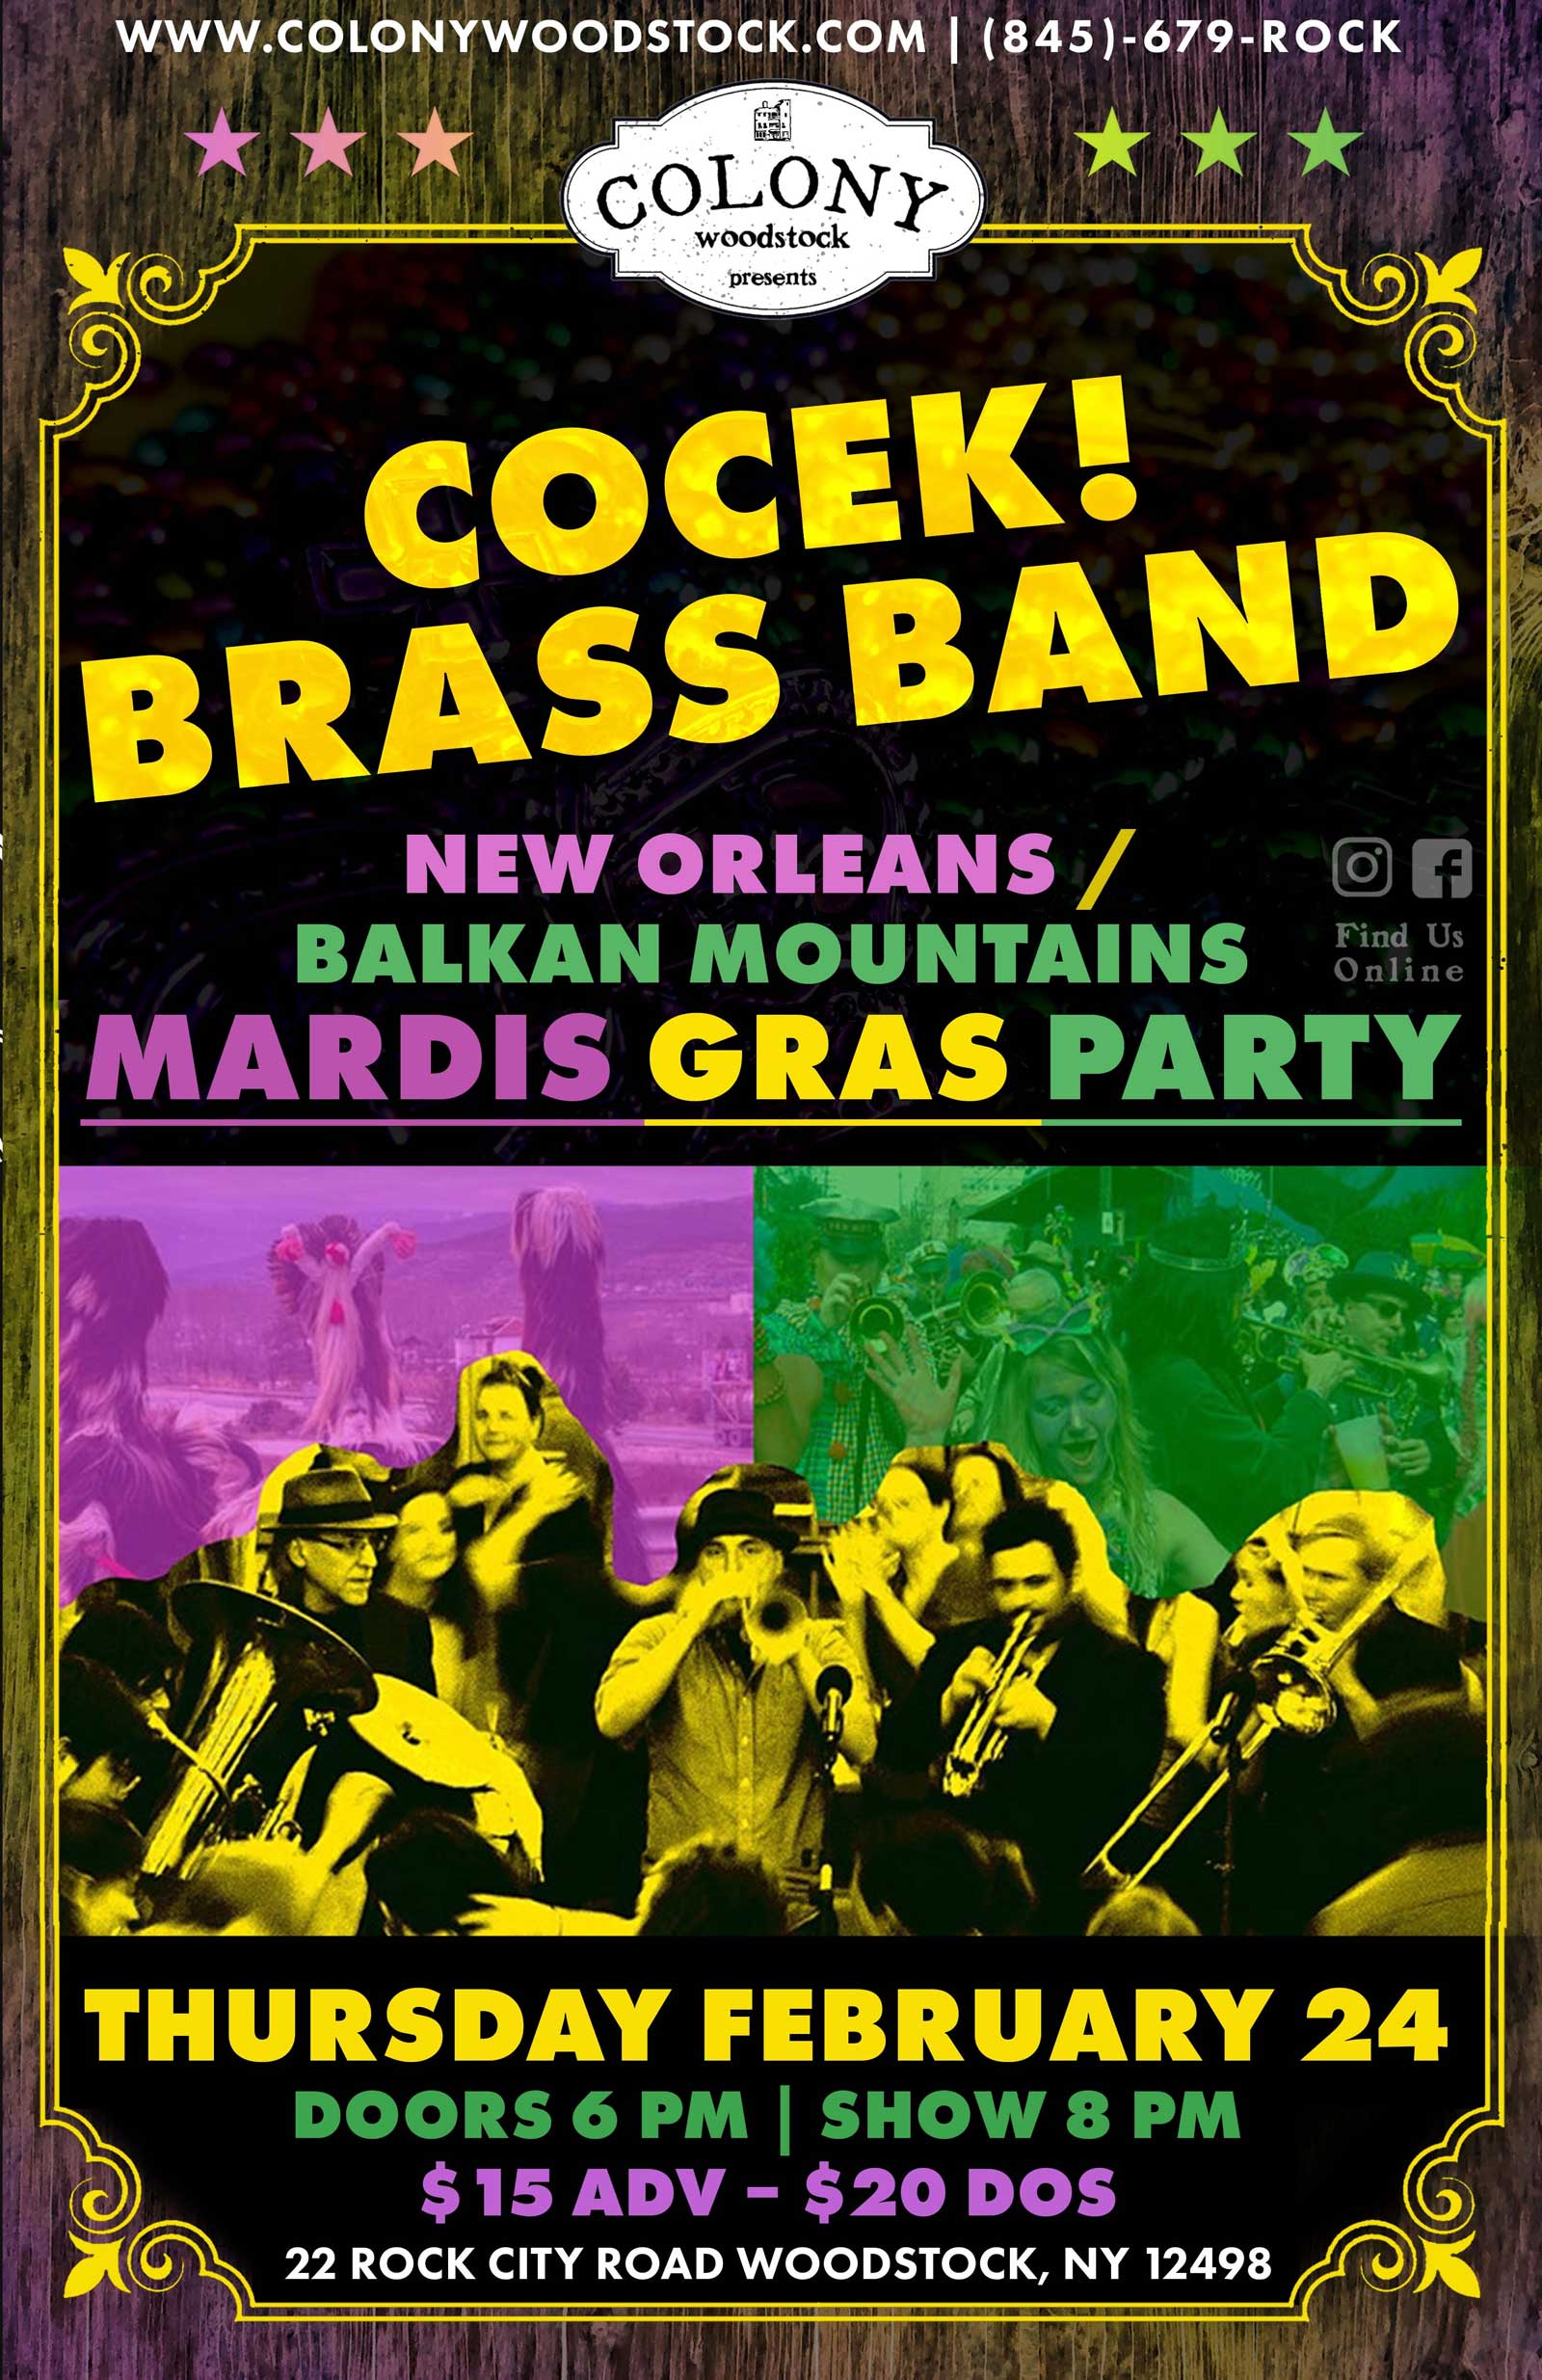 Balkan-Mountains-Mardi-Gras-Party-Feb-24-Poster-with-QR-Code-1600px